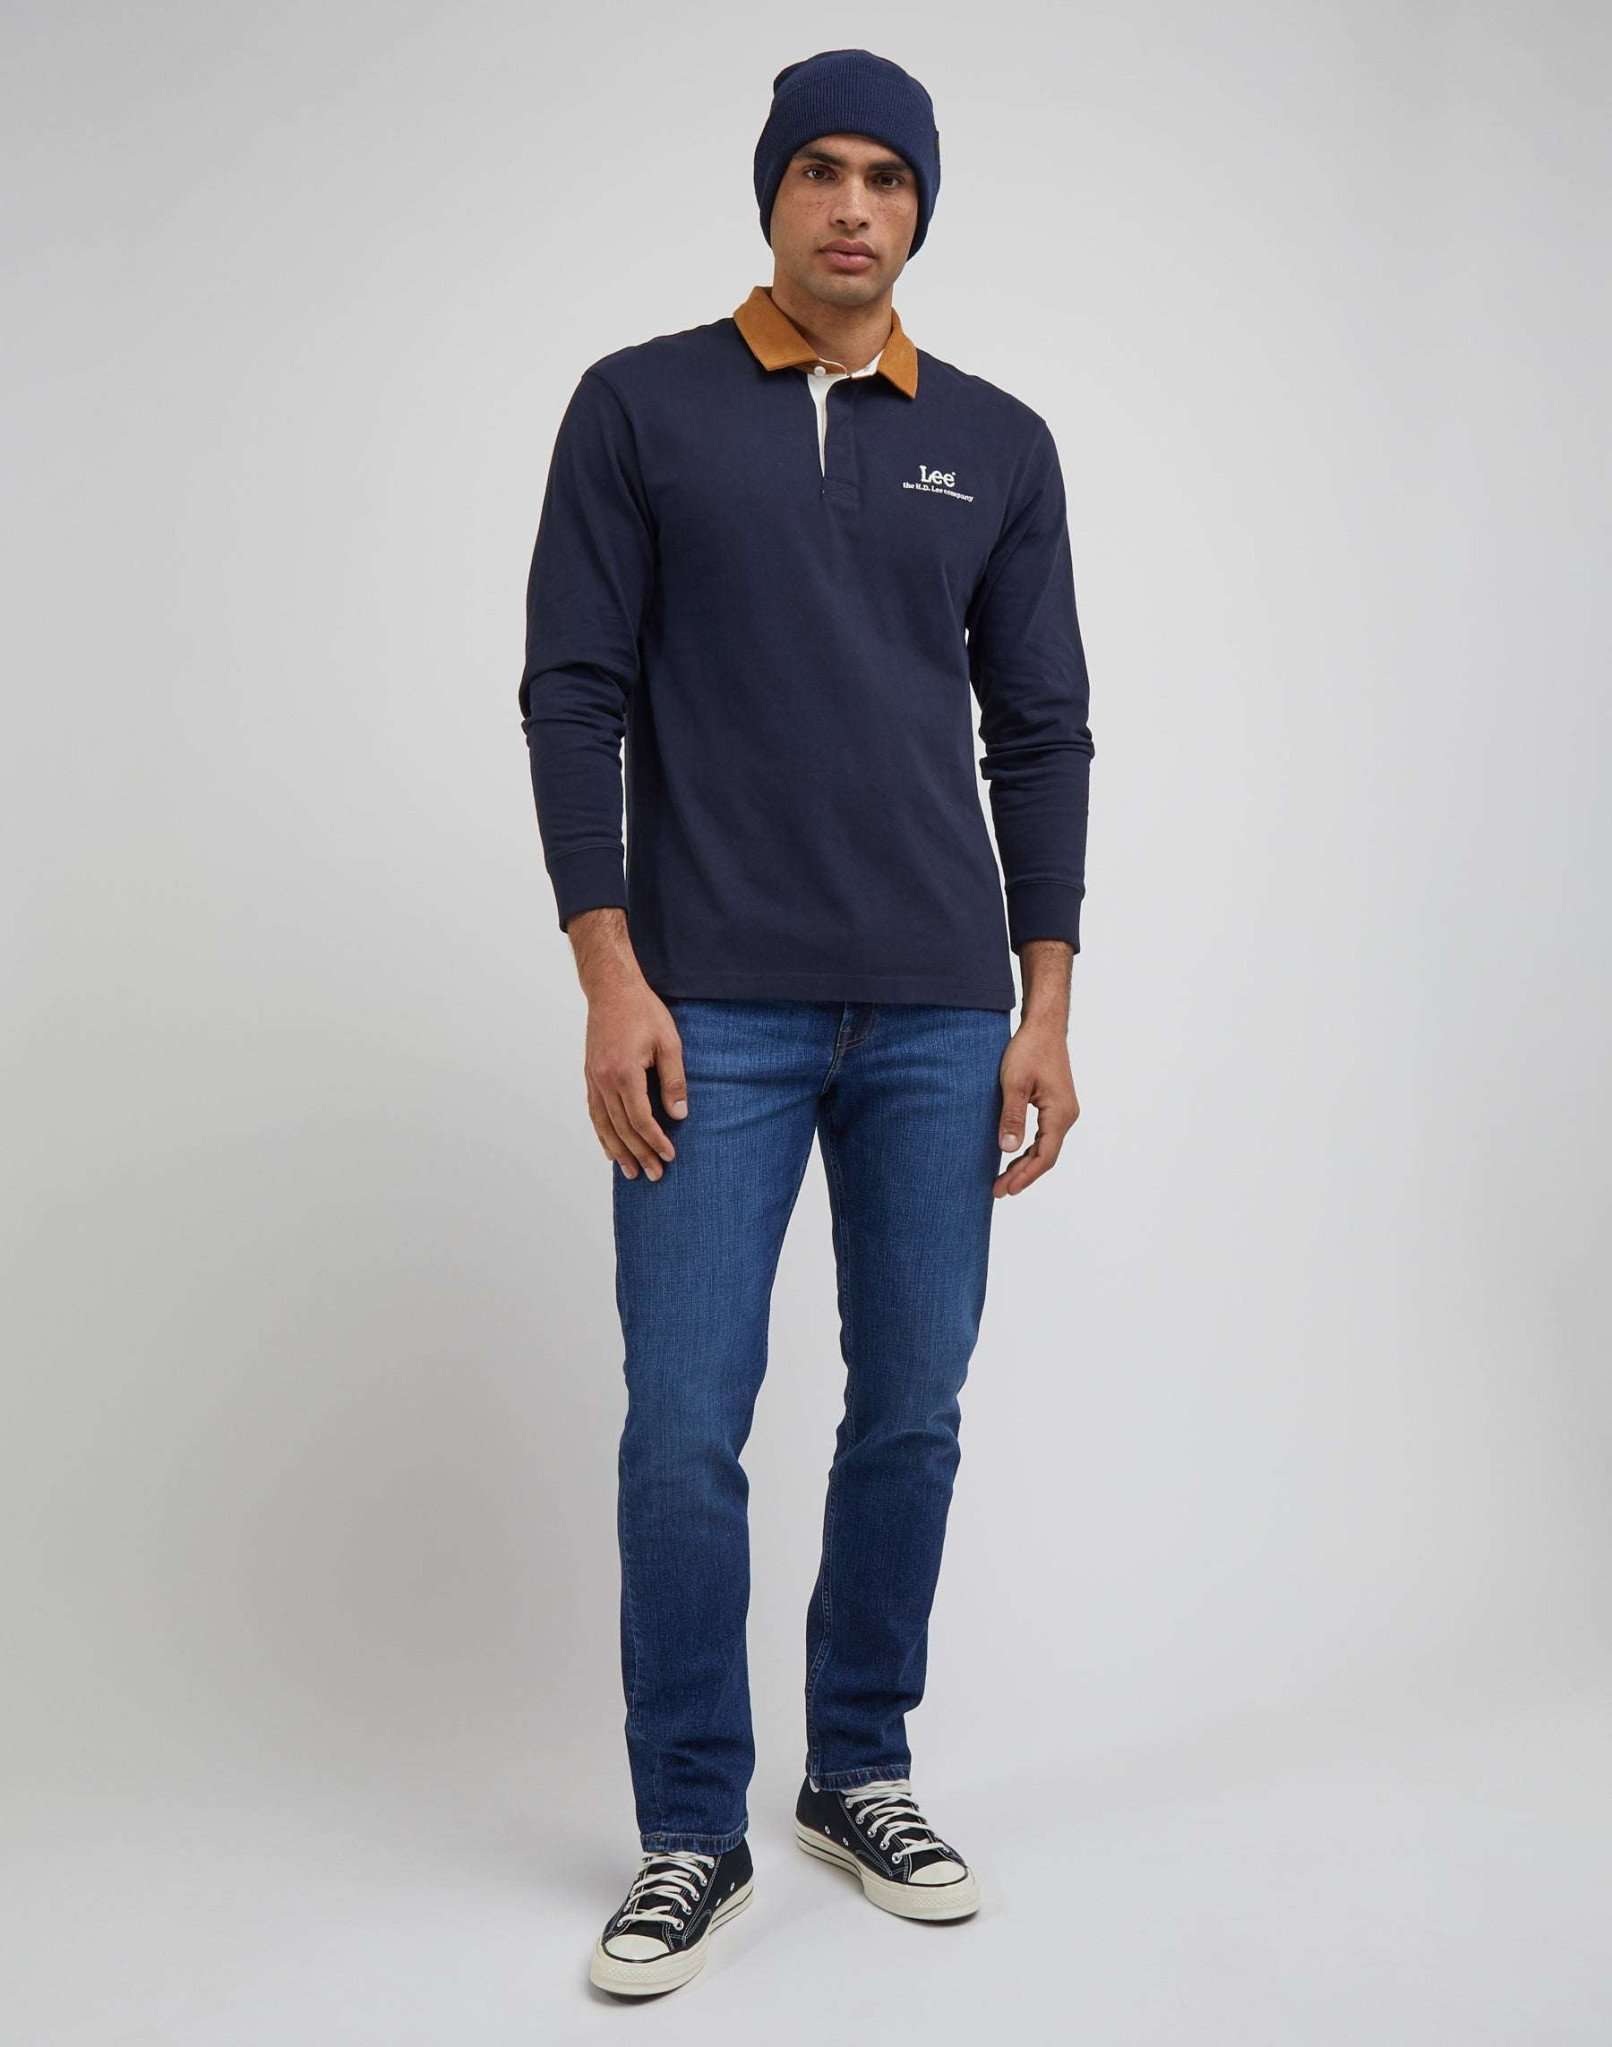 LS Contrast Collar Polo in Sky Captain Pullover Lee   